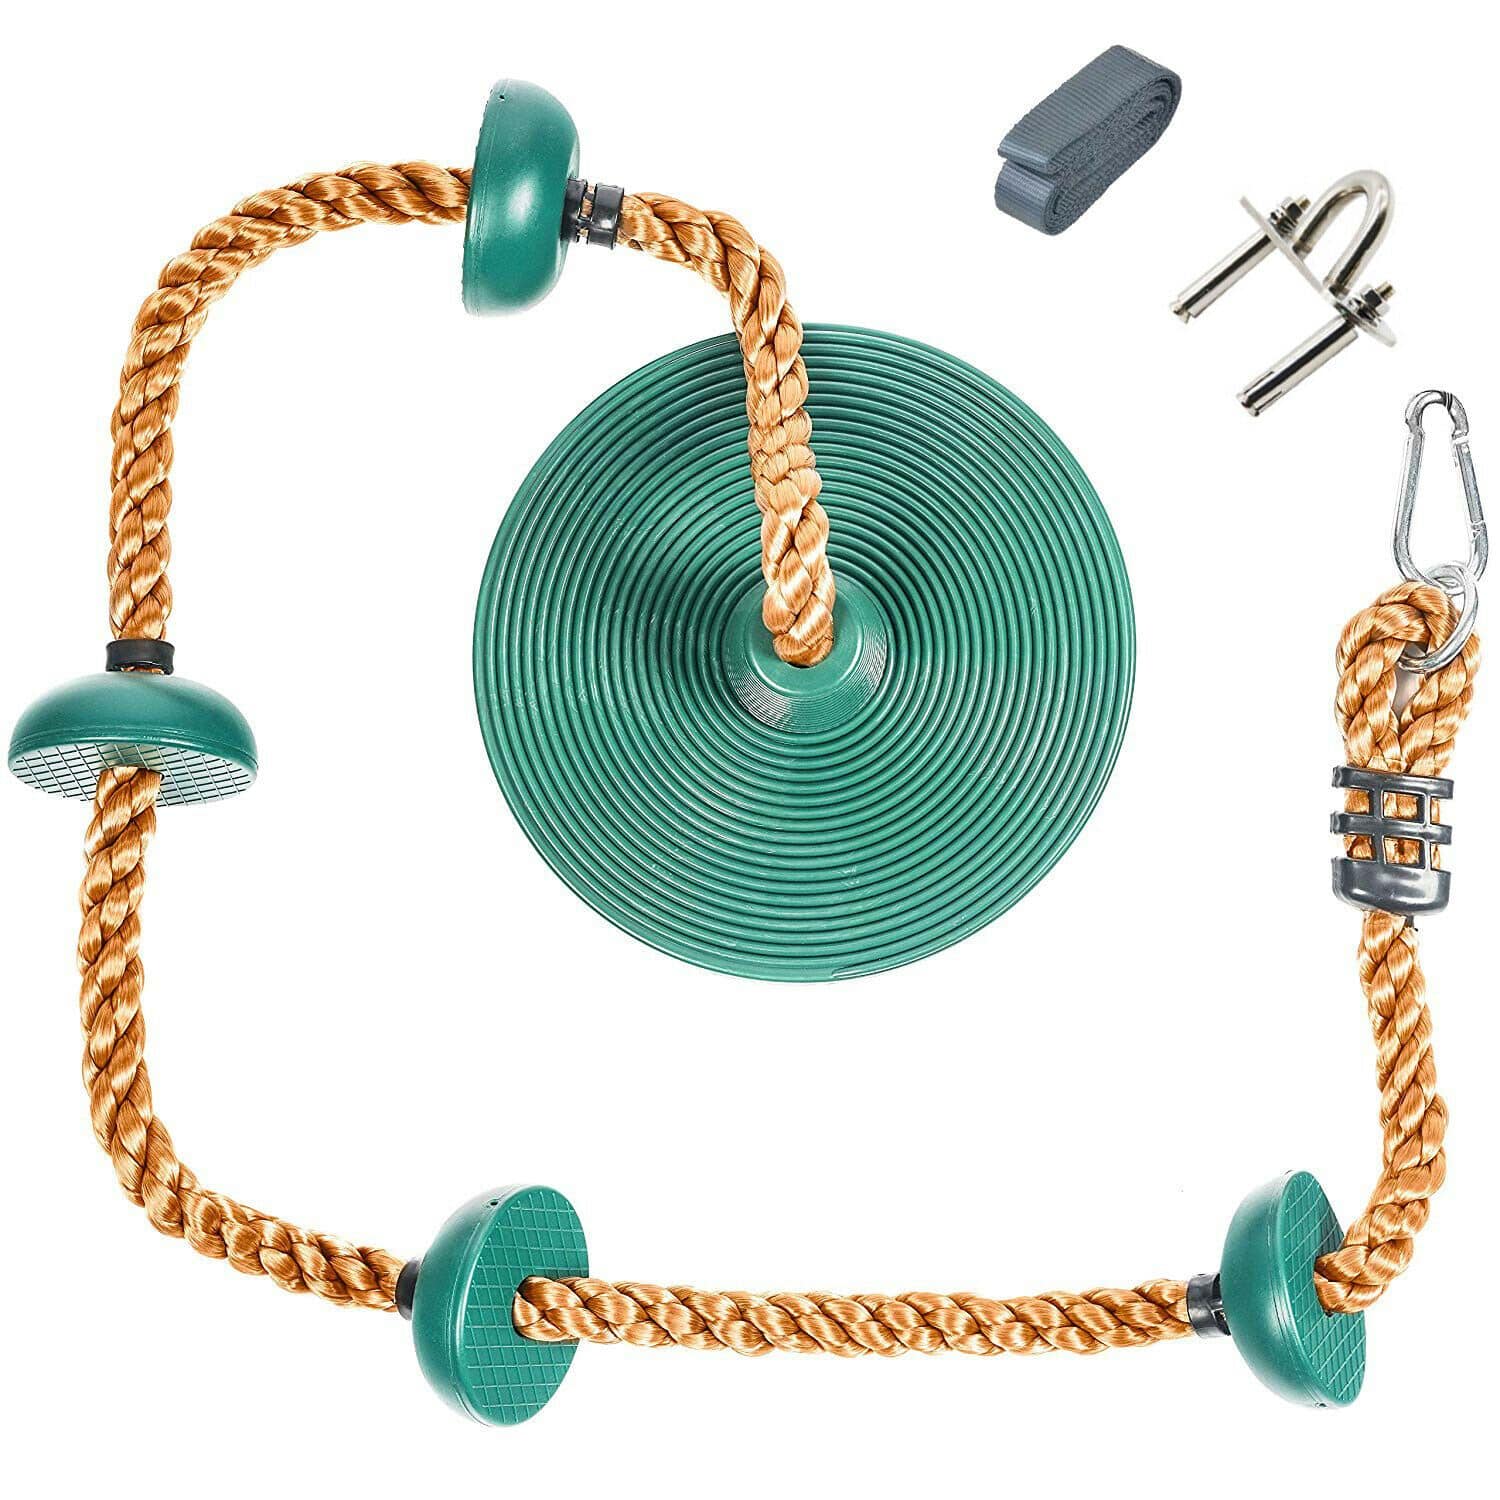 Tree Climbing Rope and Kids Outdoor Swing with Foot Hold Platforms - Green